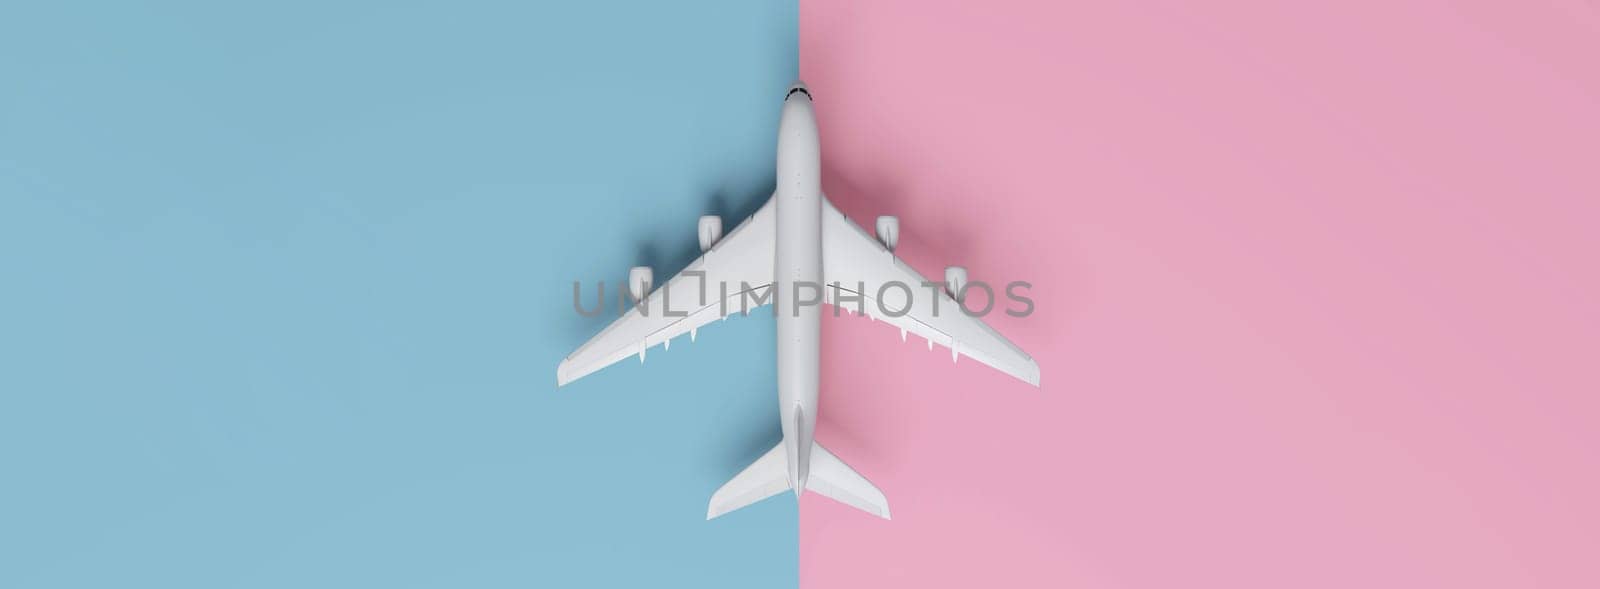 Travel concept with plane on pink and blue runway background with copy space. 3D rendering.